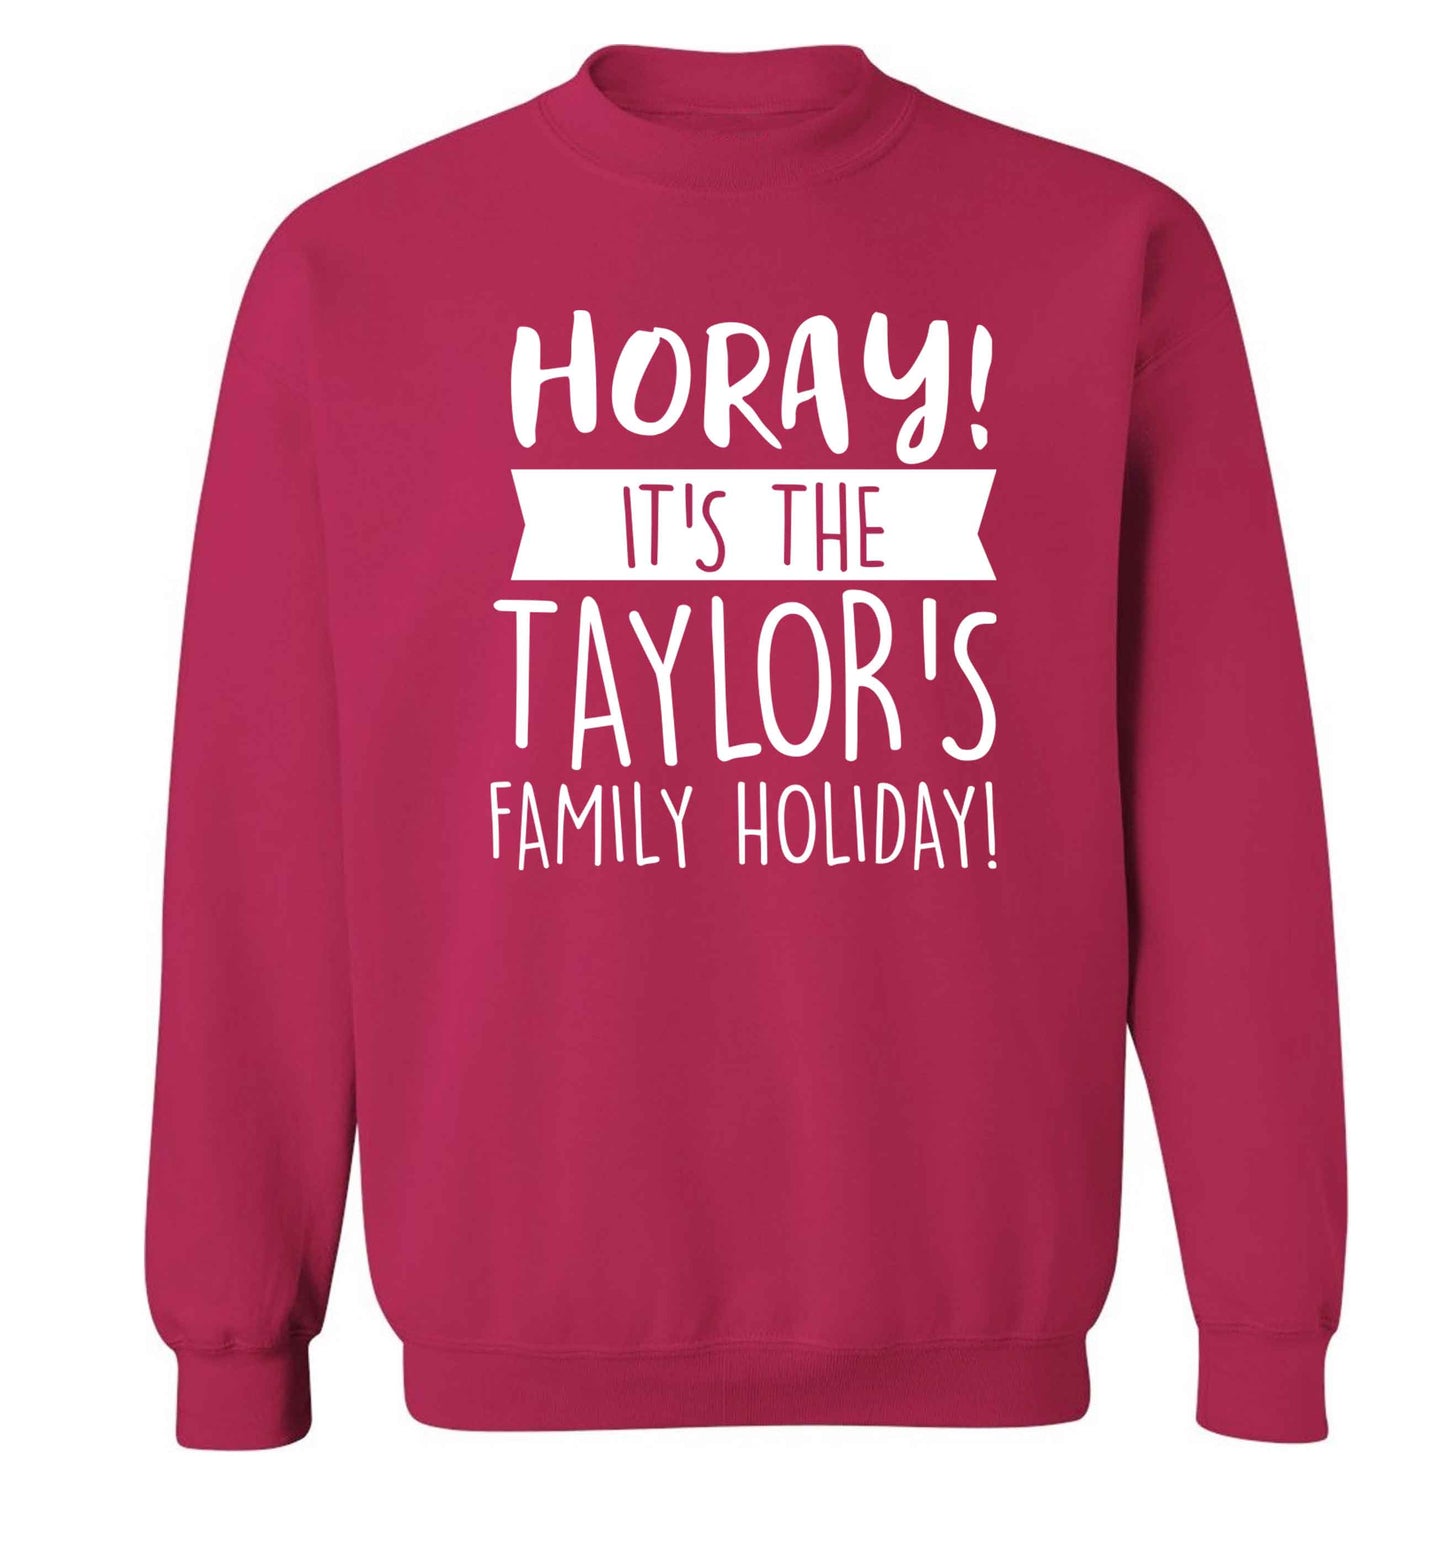 Horay it's the Taylor's family holiday! personalised item Adult's unisex pink Sweater 2XL